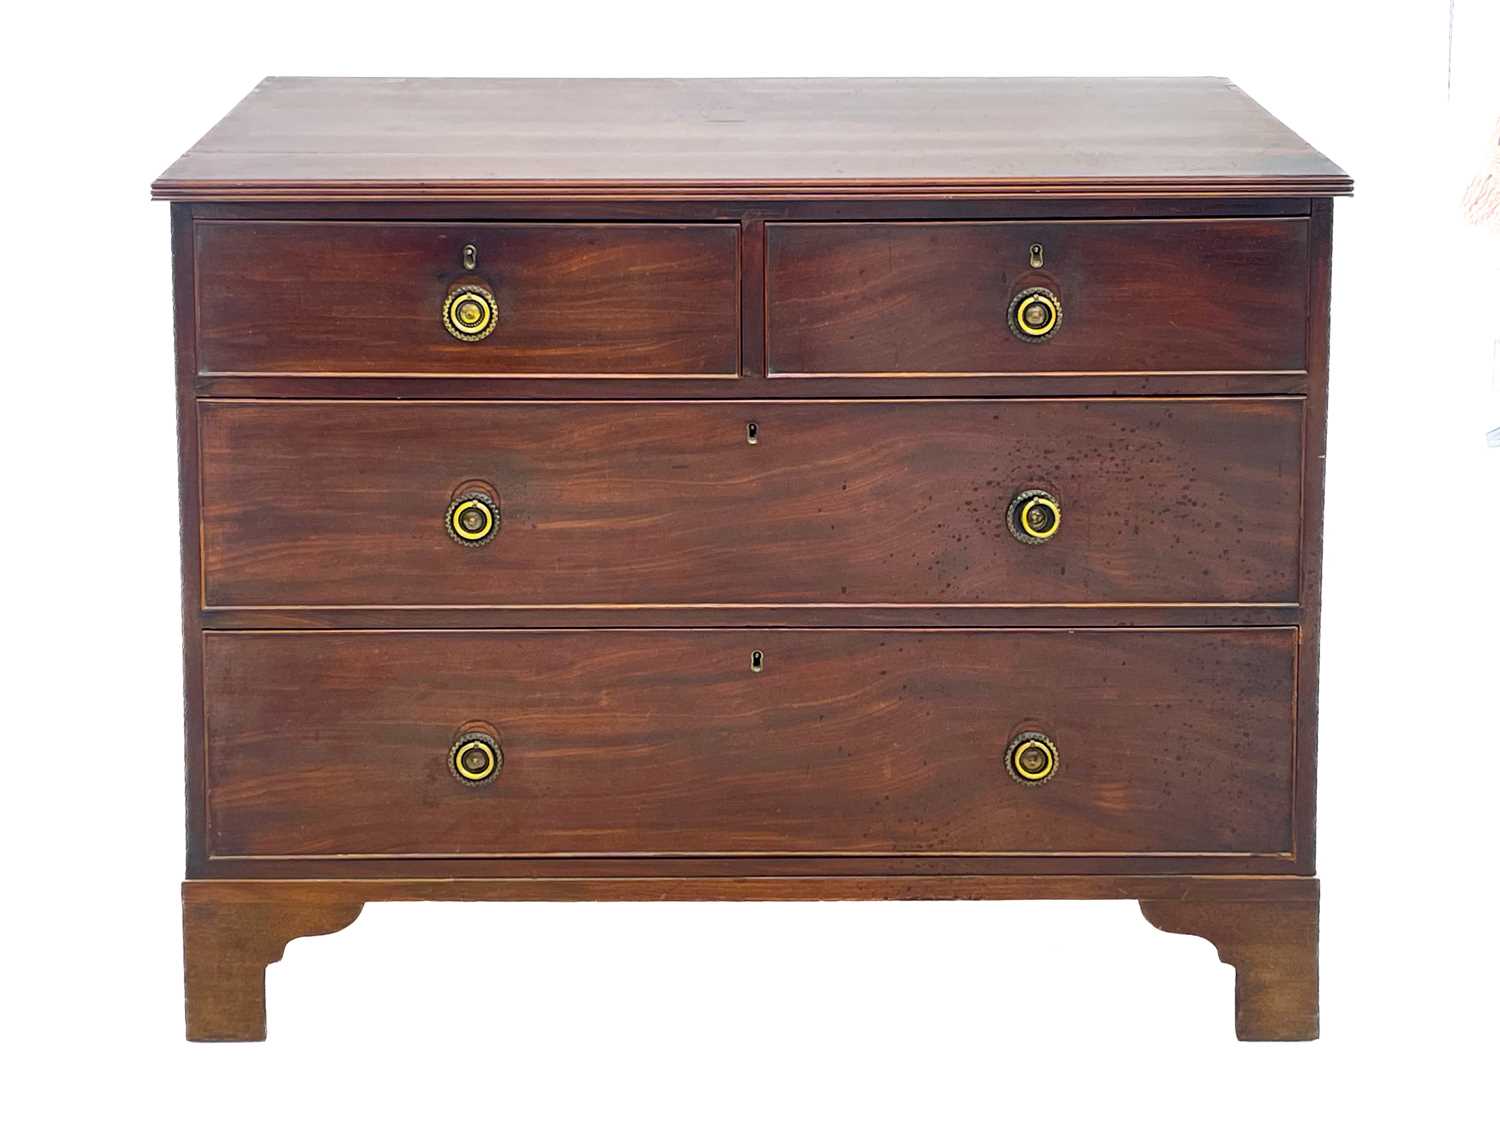 A 19th century mahogany chest of drawers. - Image 3 of 3